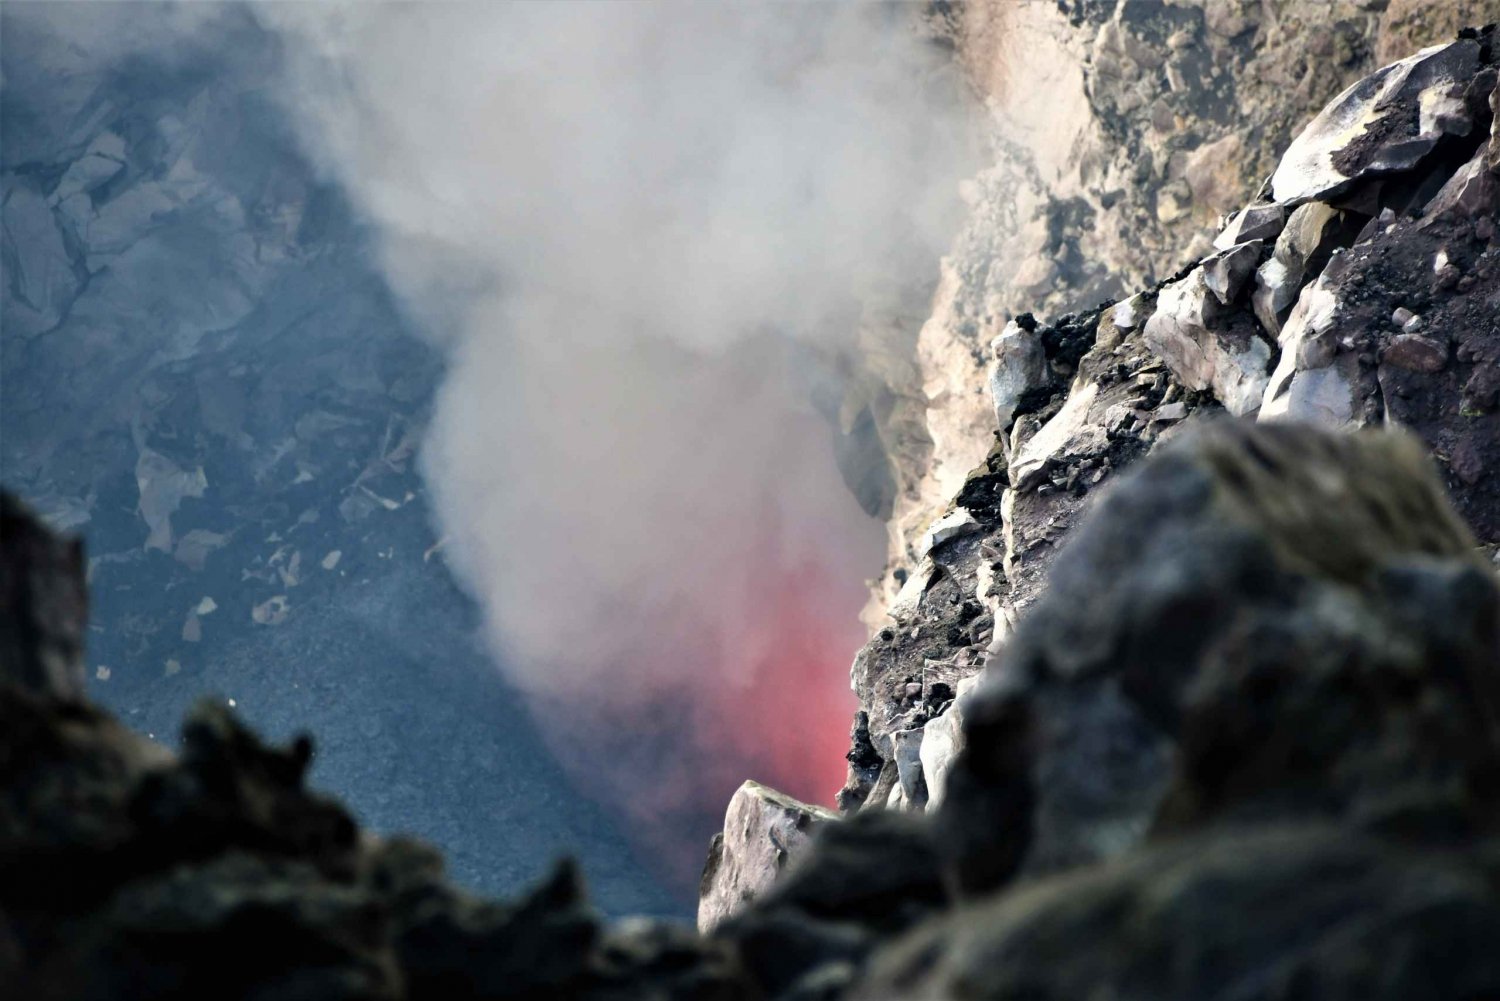 Mount Etna: Summit and Crater Guided Trek Tour